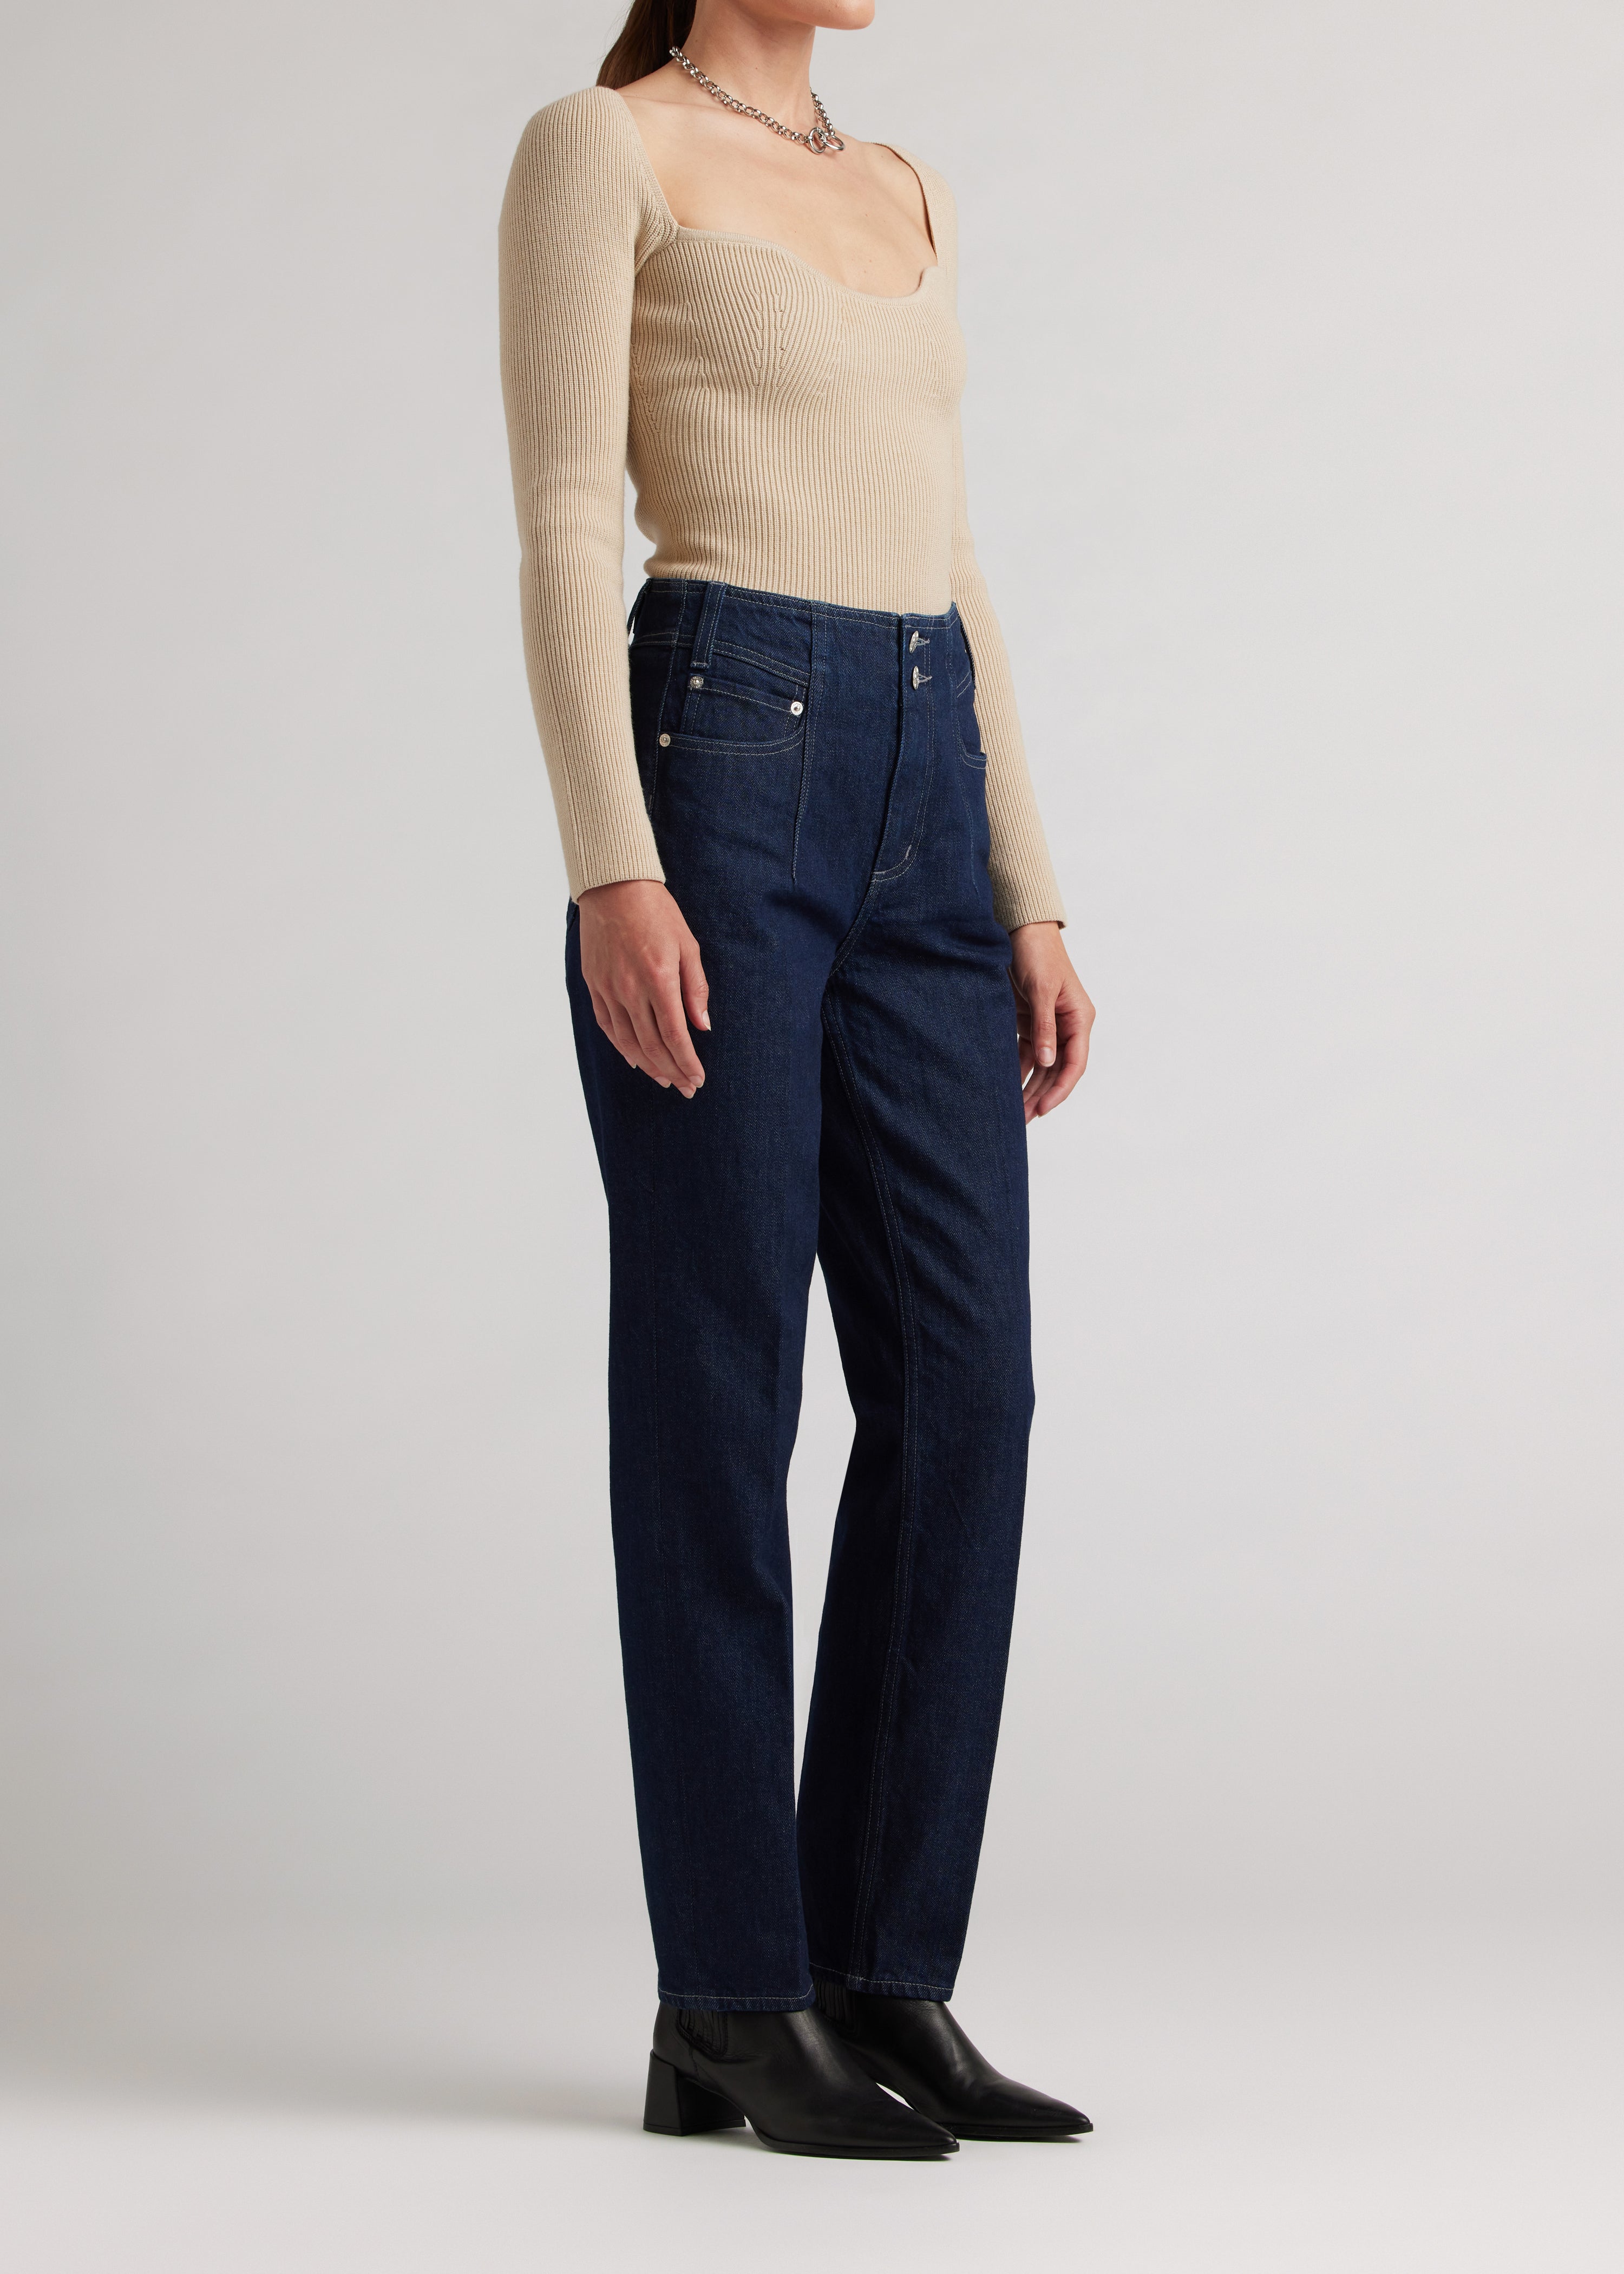 Frankie High Rise Relaxed Jean in vibration